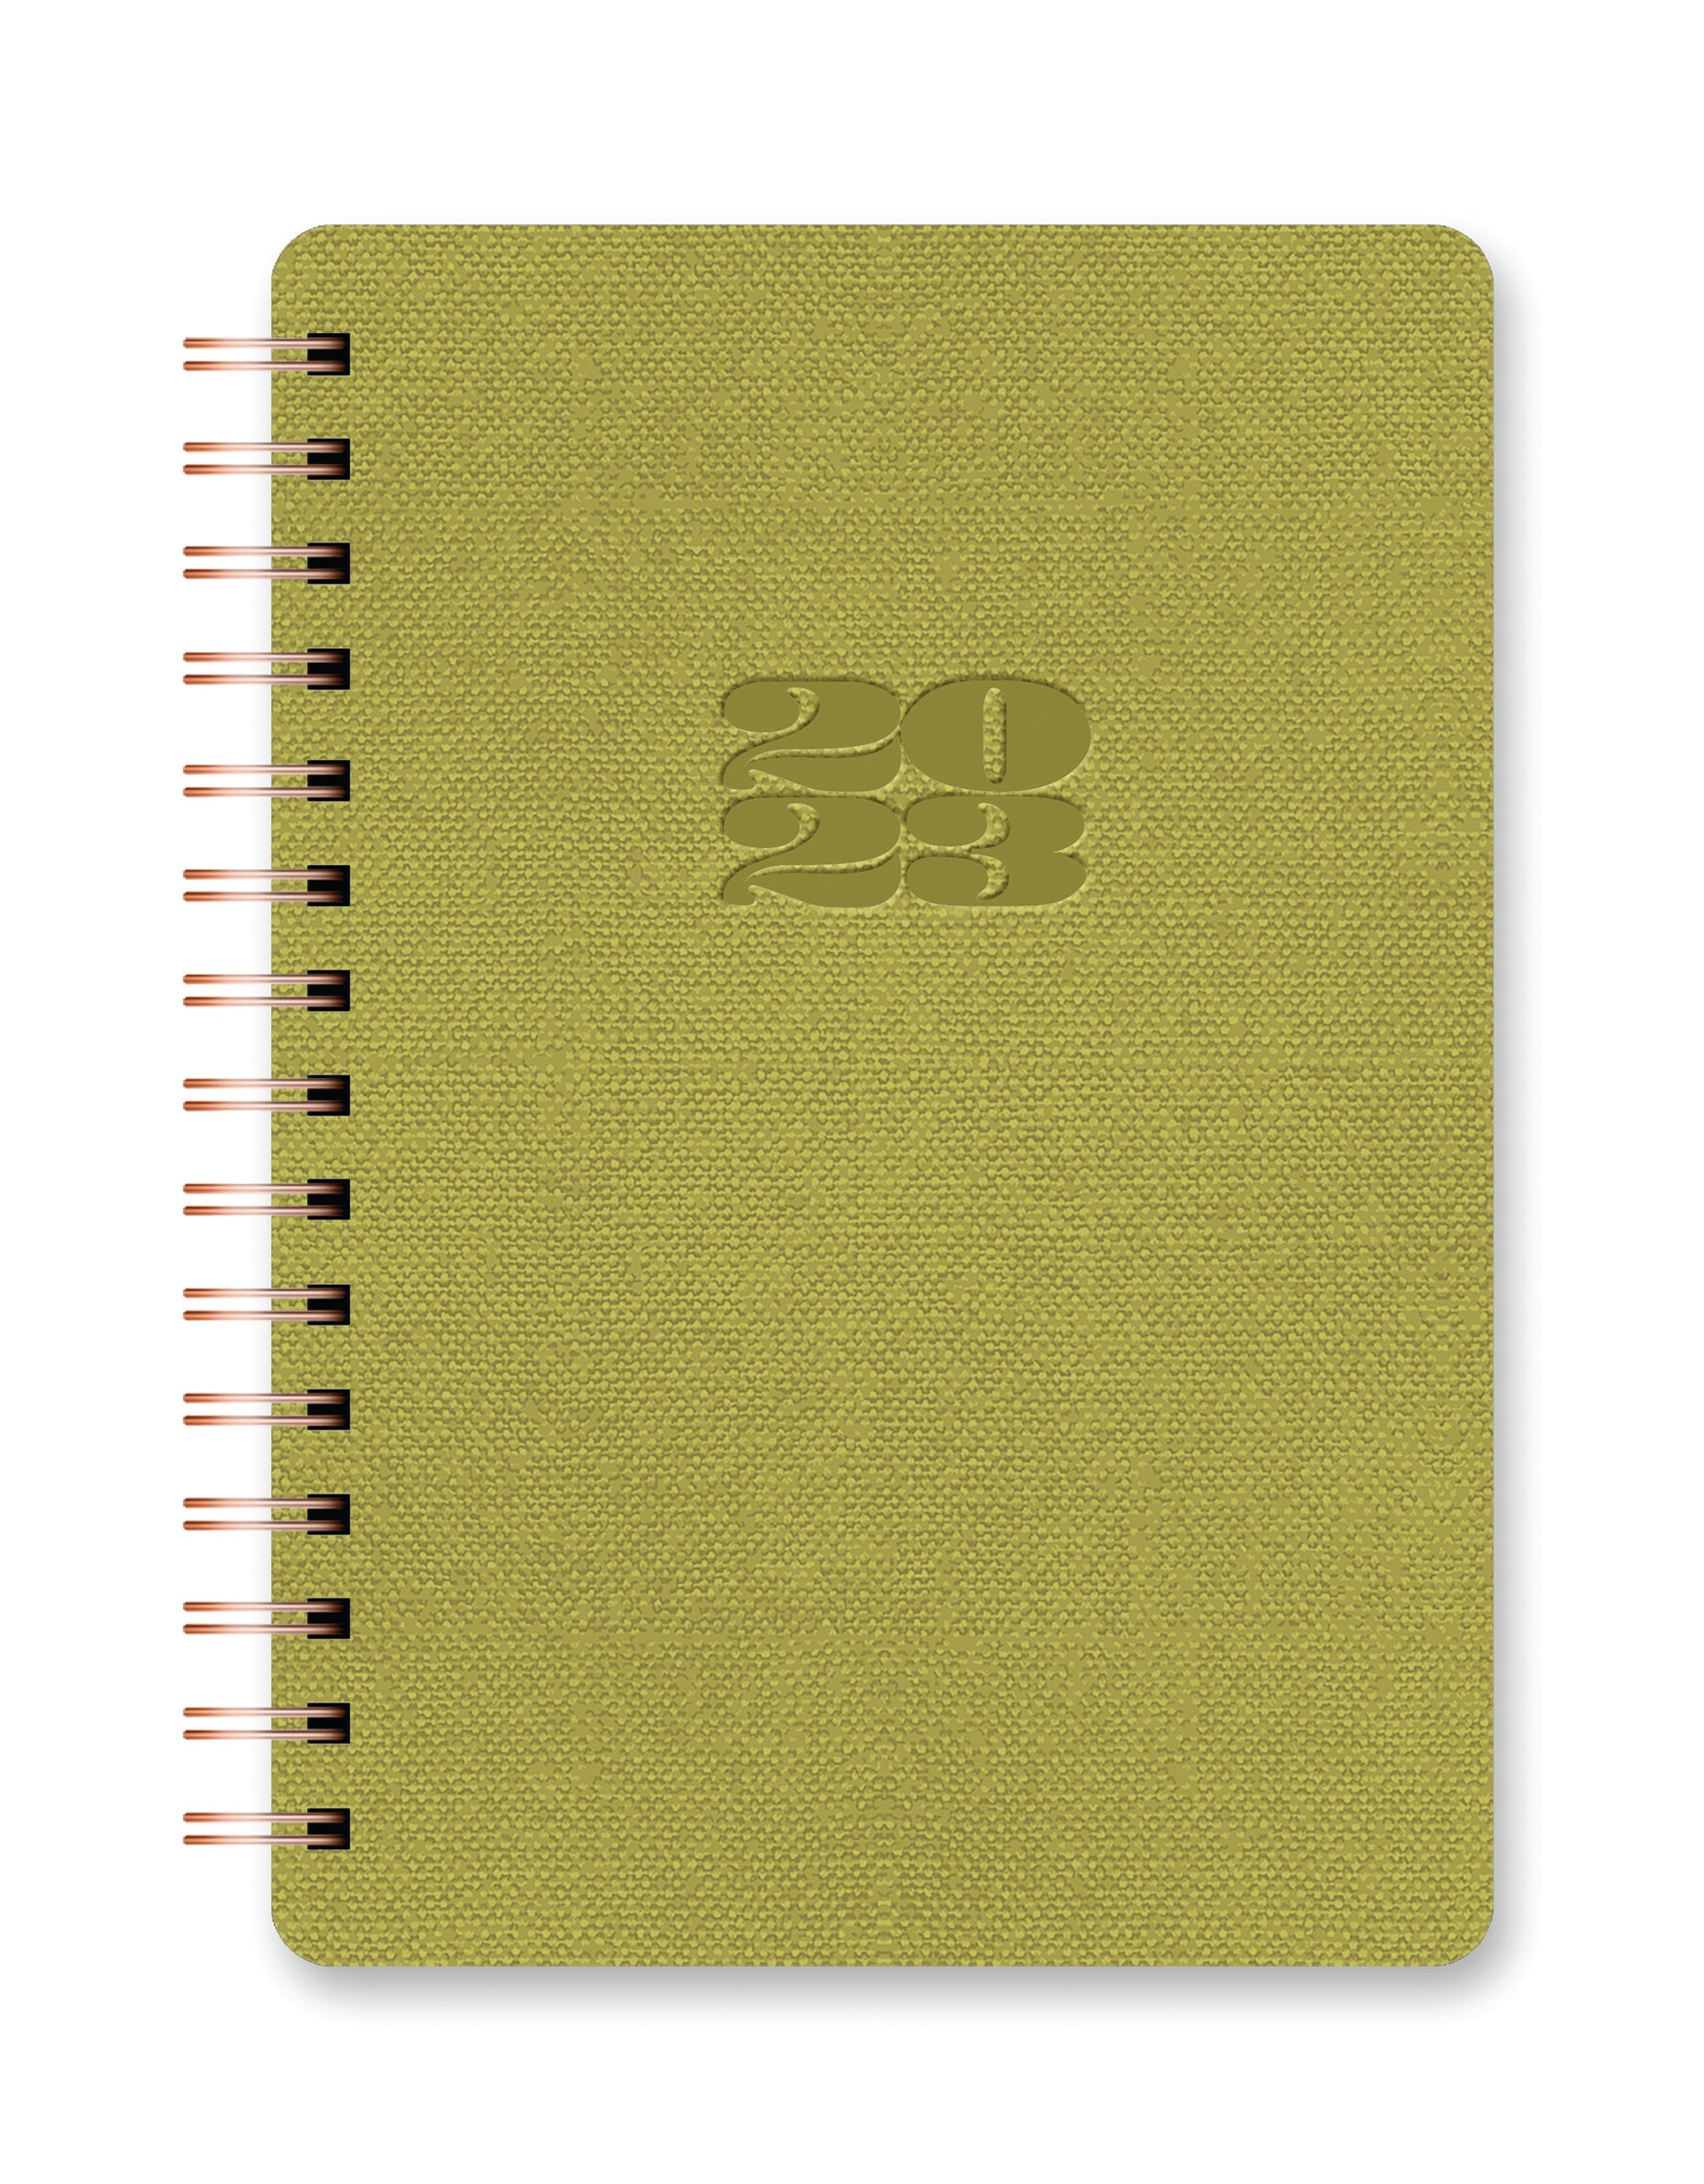 2023 Retro Green (Agatha Weekly/Monthly Planner) - Diary/Planner